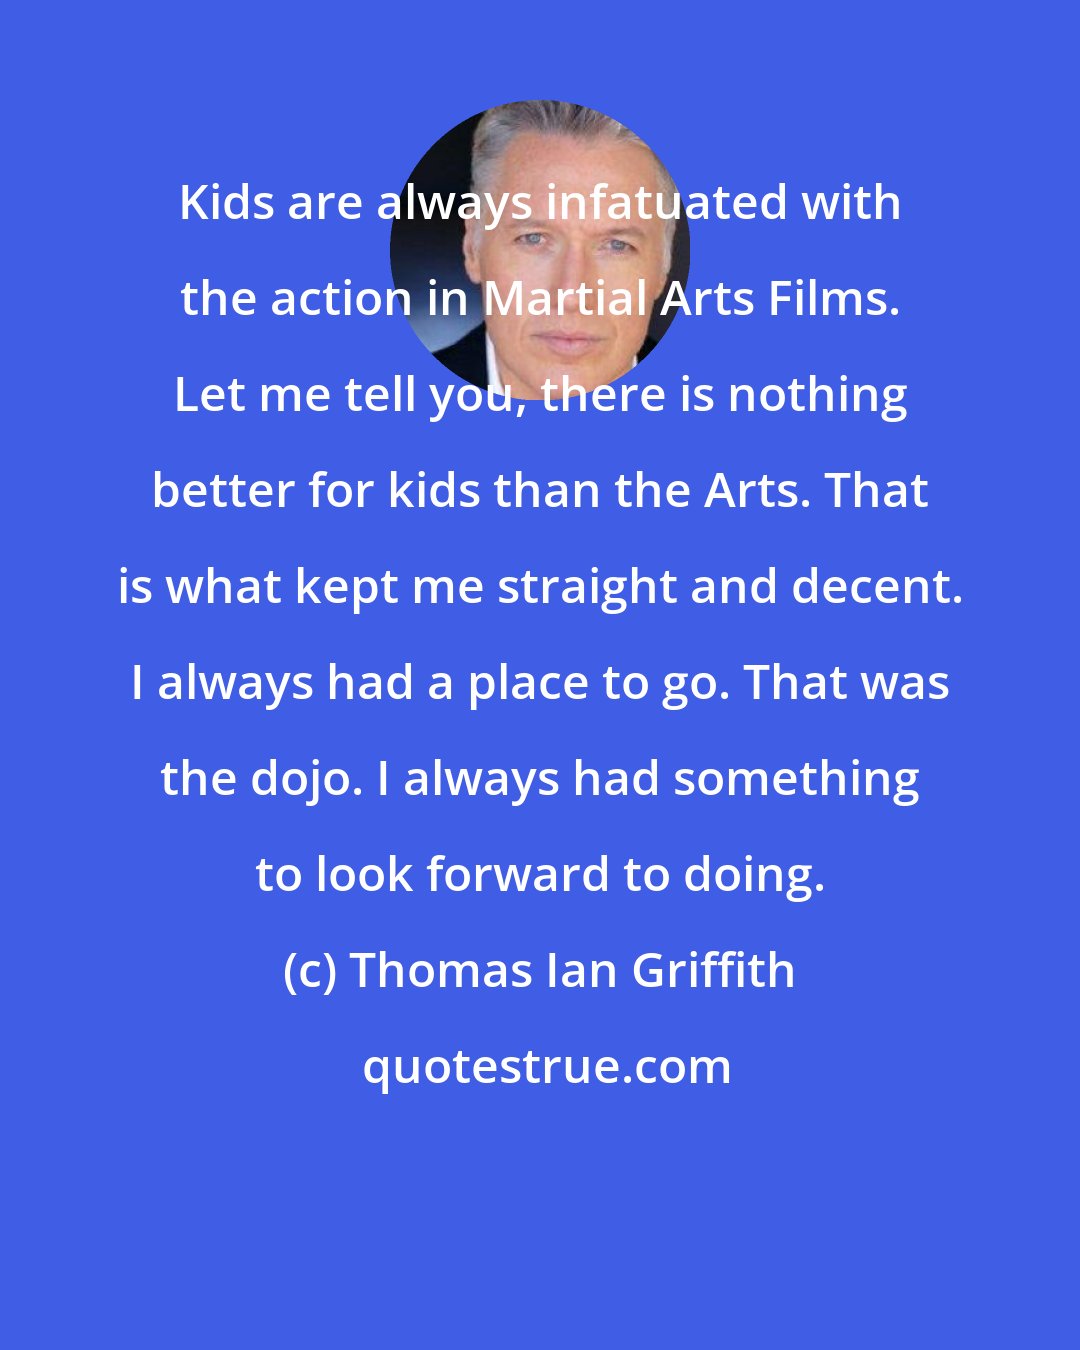 Thomas Ian Griffith: Kids are always infatuated with the action in Martial Arts Films. Let me tell you, there is nothing better for kids than the Arts. That is what kept me straight and decent. I always had a place to go. That was the dojo. I always had something to look forward to doing.